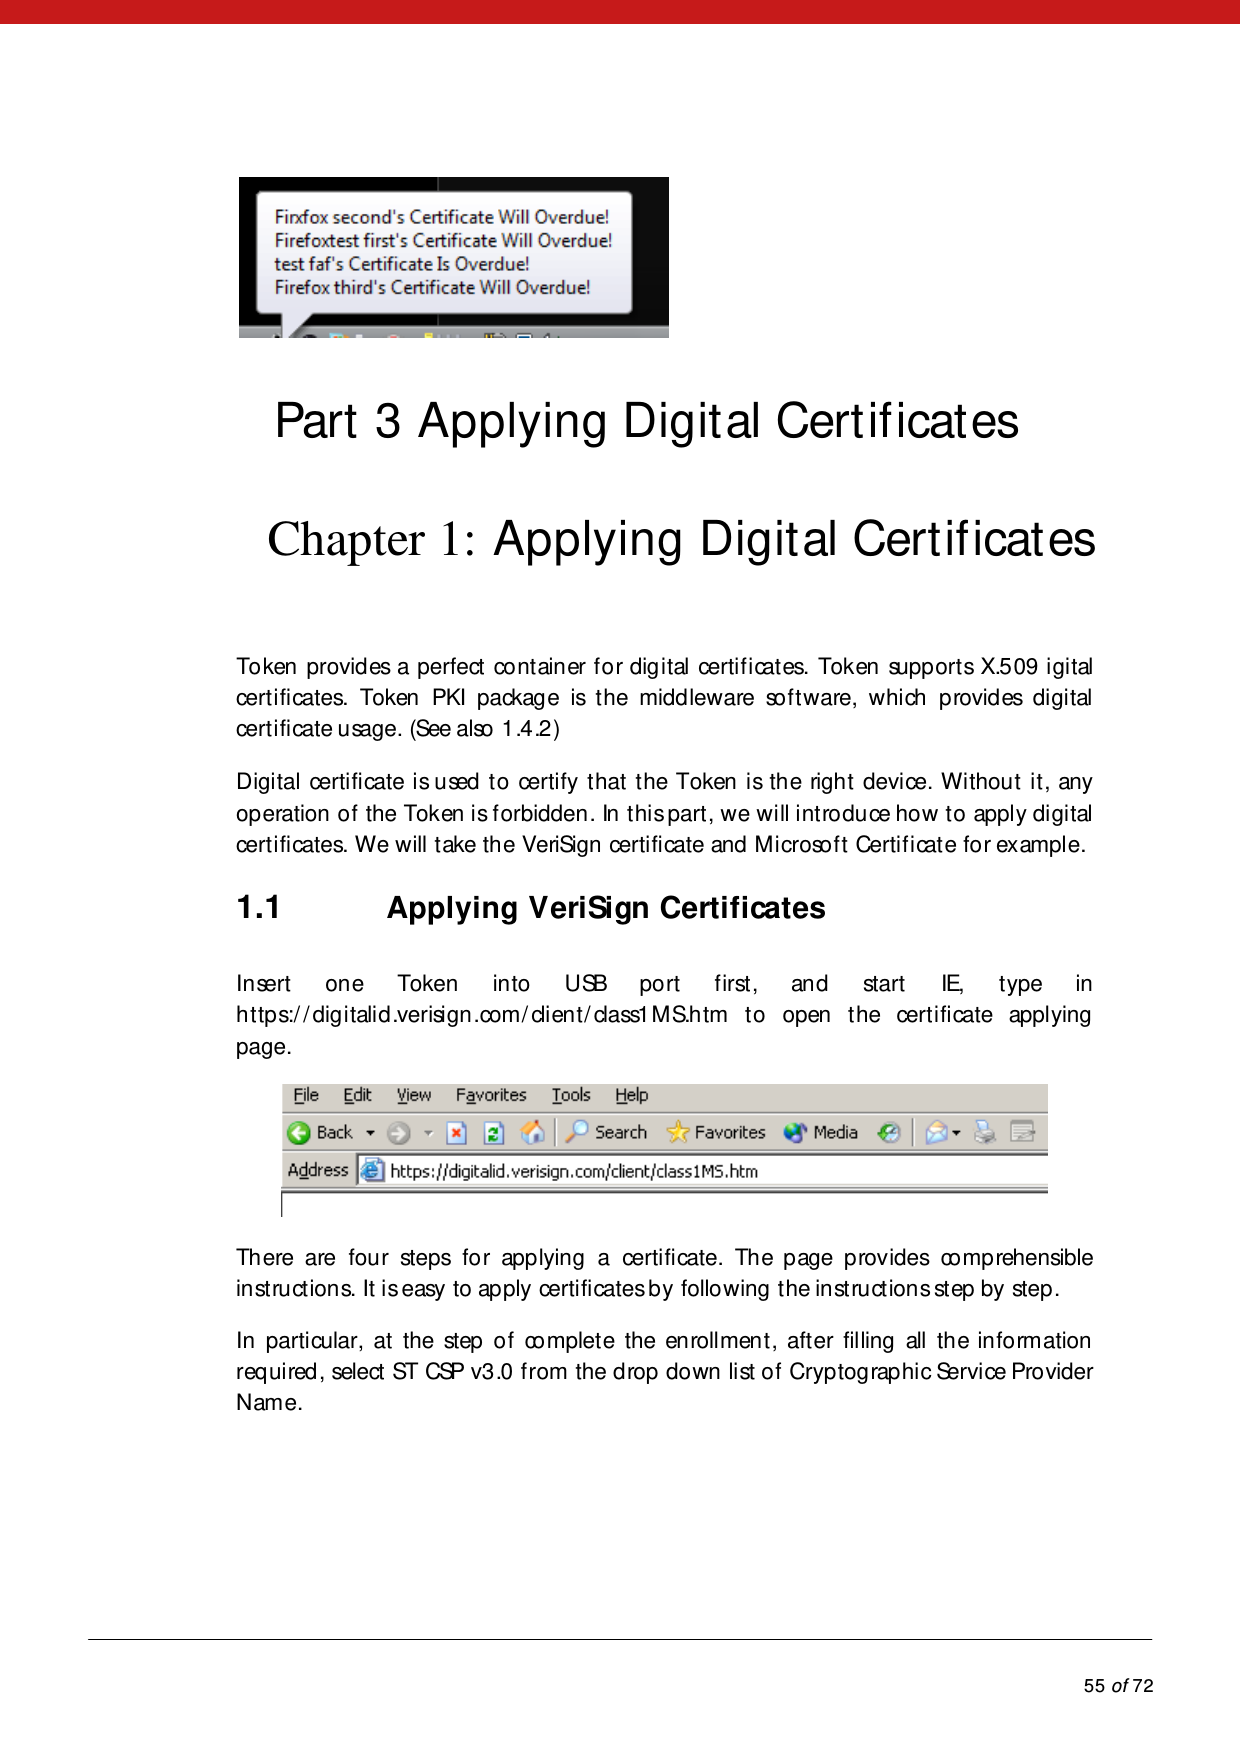            55 of 72   Part 3 Applying Digital Certificates Chapter 1: Applying Digital Certificates Token provides a perfect container for digital certificates. Token supports X.509 igital certificates.  Token PKI package is the middleware software, which provides digital certificate usage. (See also 1.4.2)  Digital certificate is used to certify that the Token is the right device. Without it, any op eration  o f  the Token is forbidden. In this part, we will introduce how to apply digital certificates. We will take the VeriSign certificate and Microsoft Certificate for example. 1.1 Applying VeriSign Certificates Insert one Token into USB port first, and start IE, type in https://digitalid.verisign.com/client/class1MS.htm to open the certificate applying page.   Th ere are fou r steps fo r app lying a certificate. The page provides comprehensible instructions. It is easy to apply certificates by following the instructions step by step. In  parti cular, at  the step  o f  co mplet e the en roll men t , aft er fil ling  all  th e in fo rm ation required, select ST CSP v3.0 from the drop down list of Cryptographic Service Provider Name. 